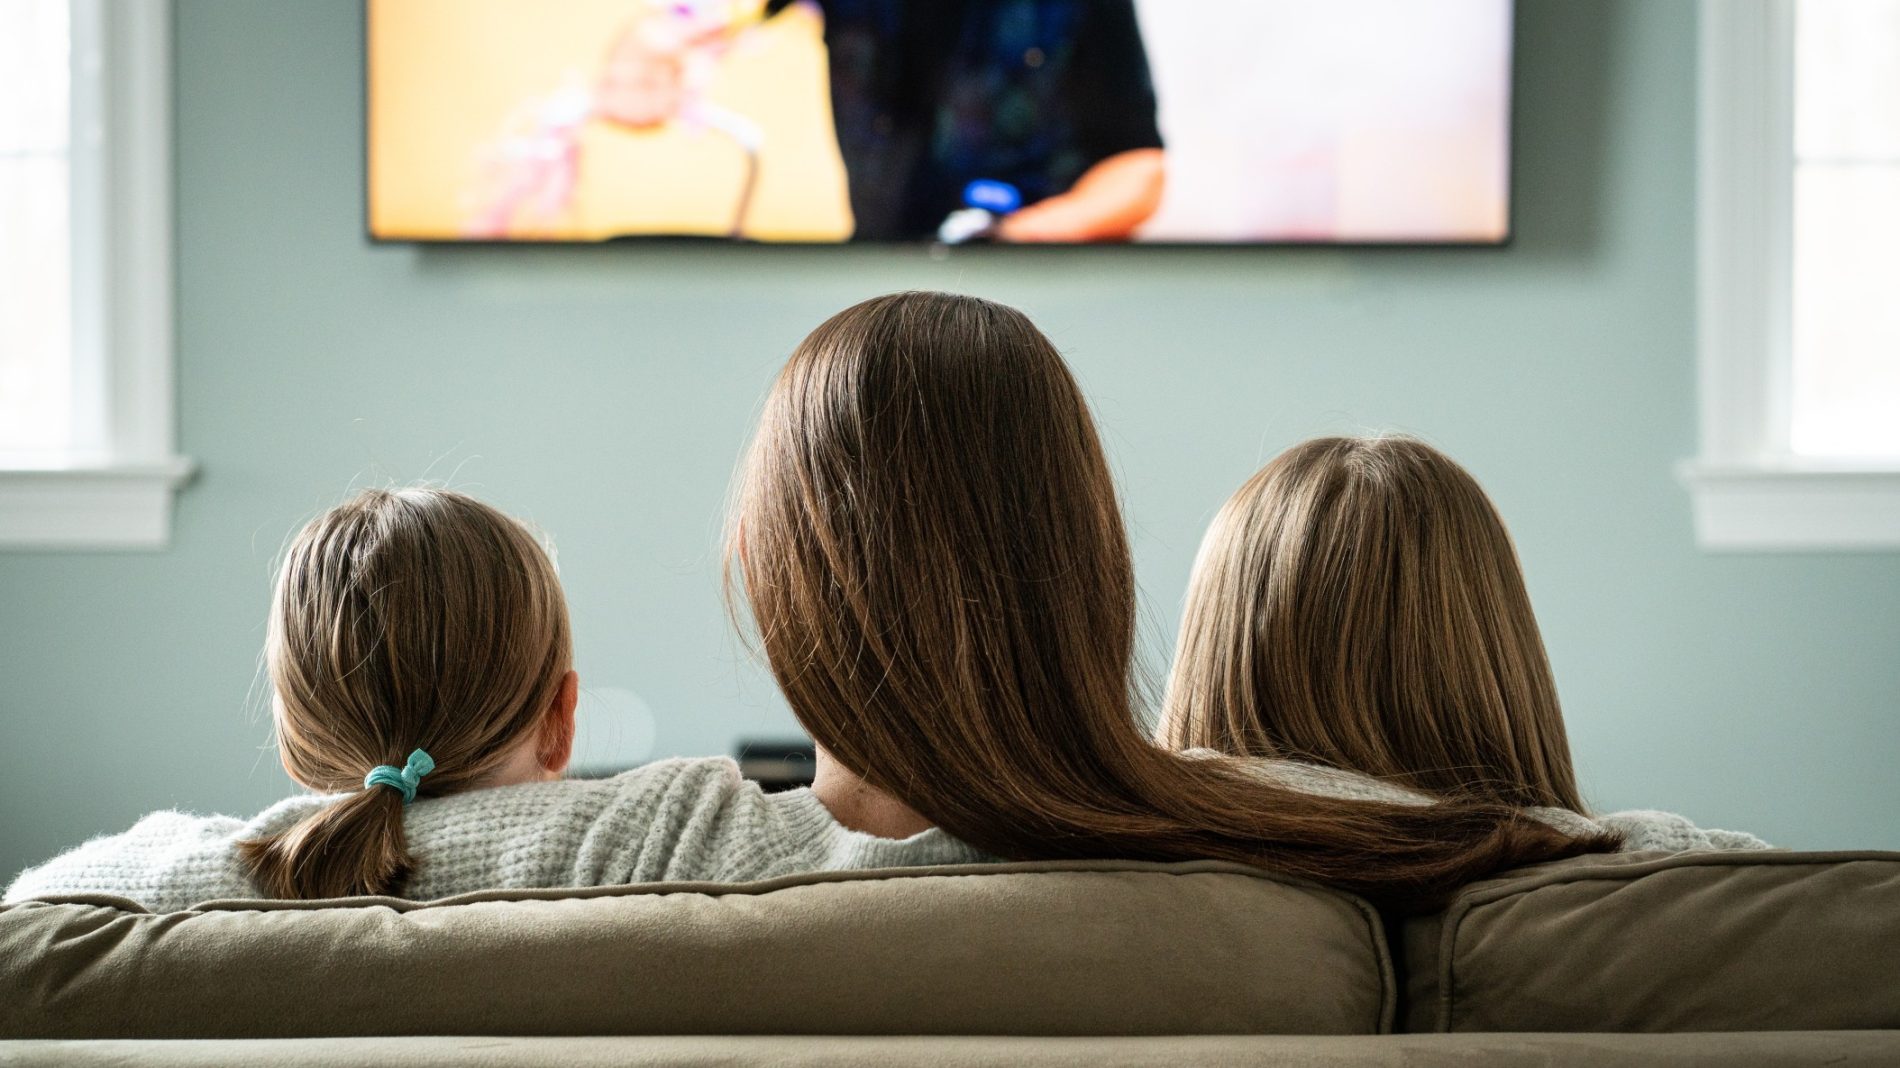 mom-and-daughters-watching-tv-at-home-during-family-time_t20_nRyQLK